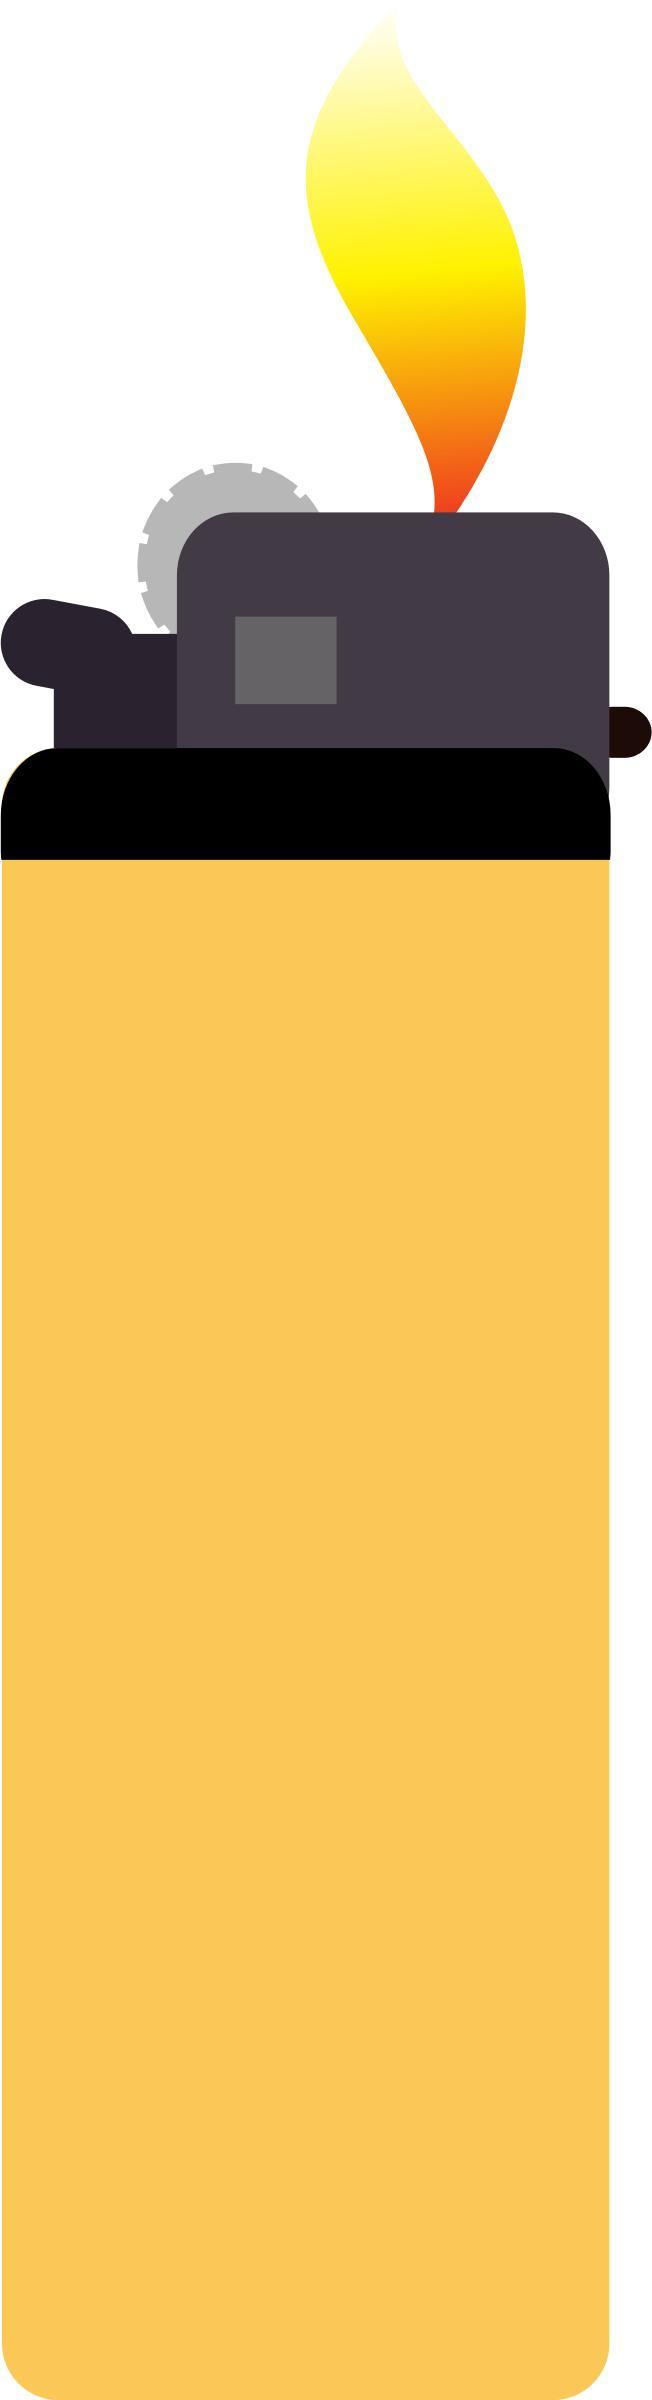 Yellow lighter with flame png transparent